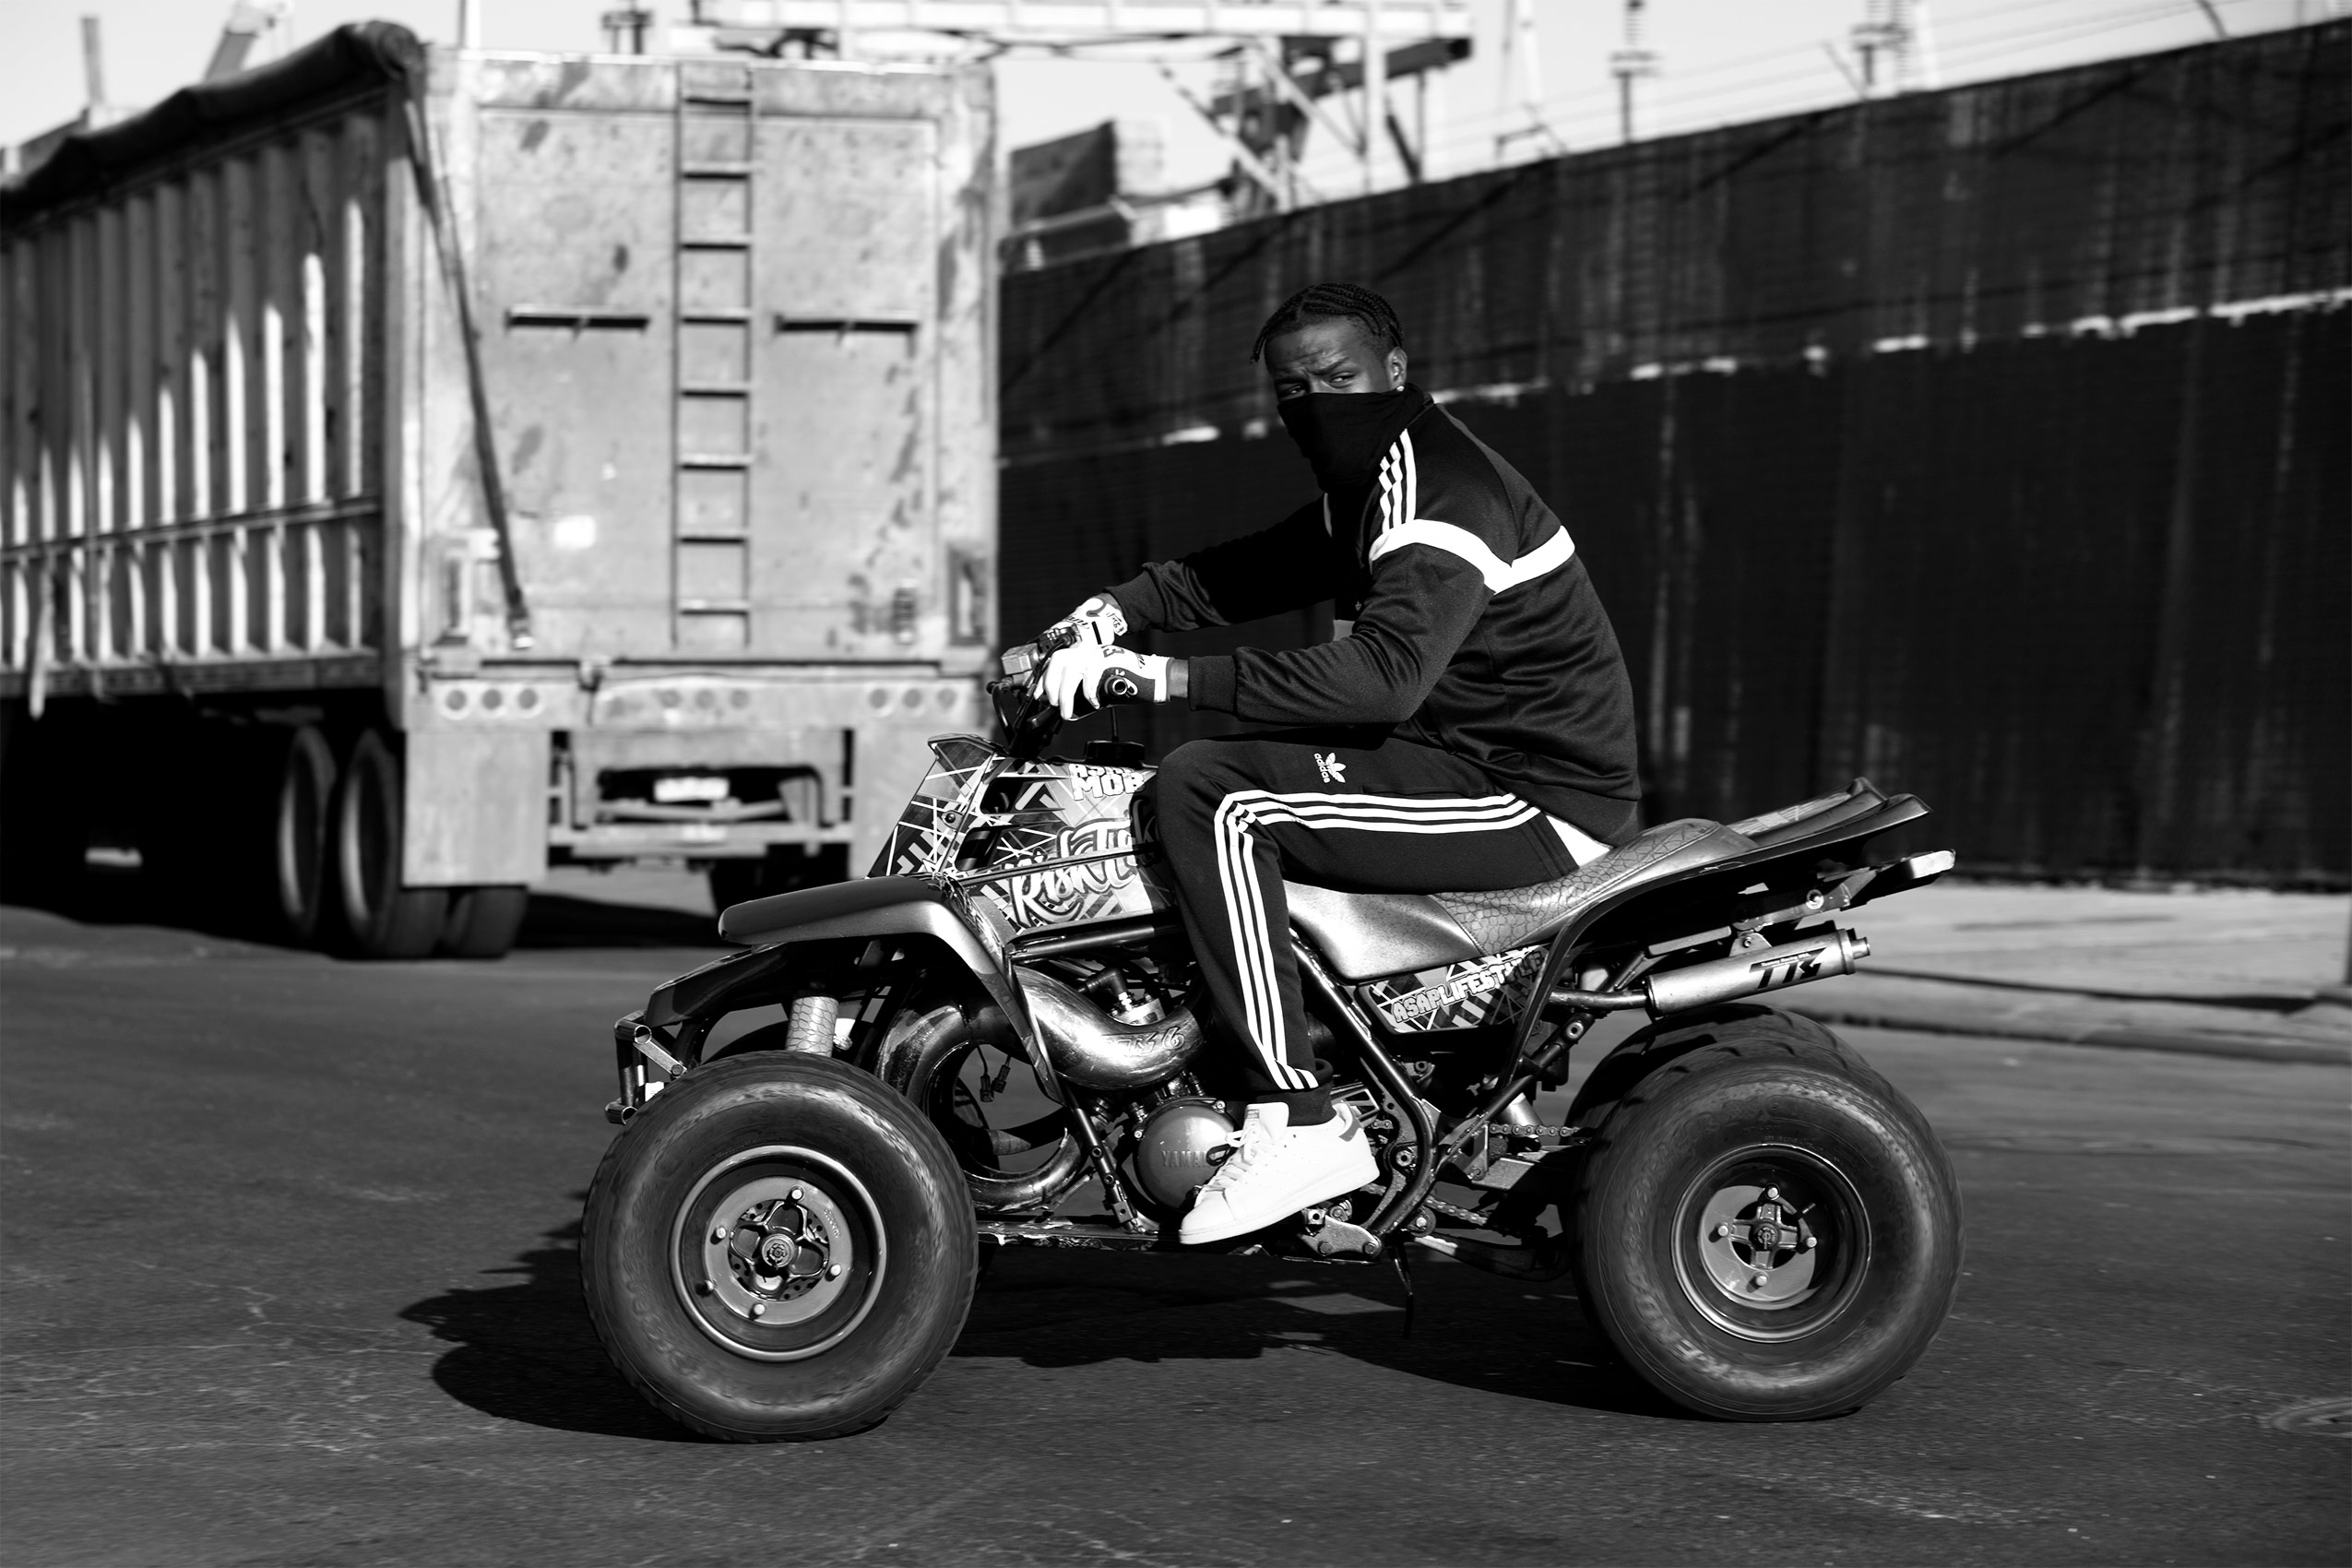 Documenting bike life motorcycle, dirt bike, quad, 4 wheeler, street culture photographed in New York City in Harlem and The Bronx.